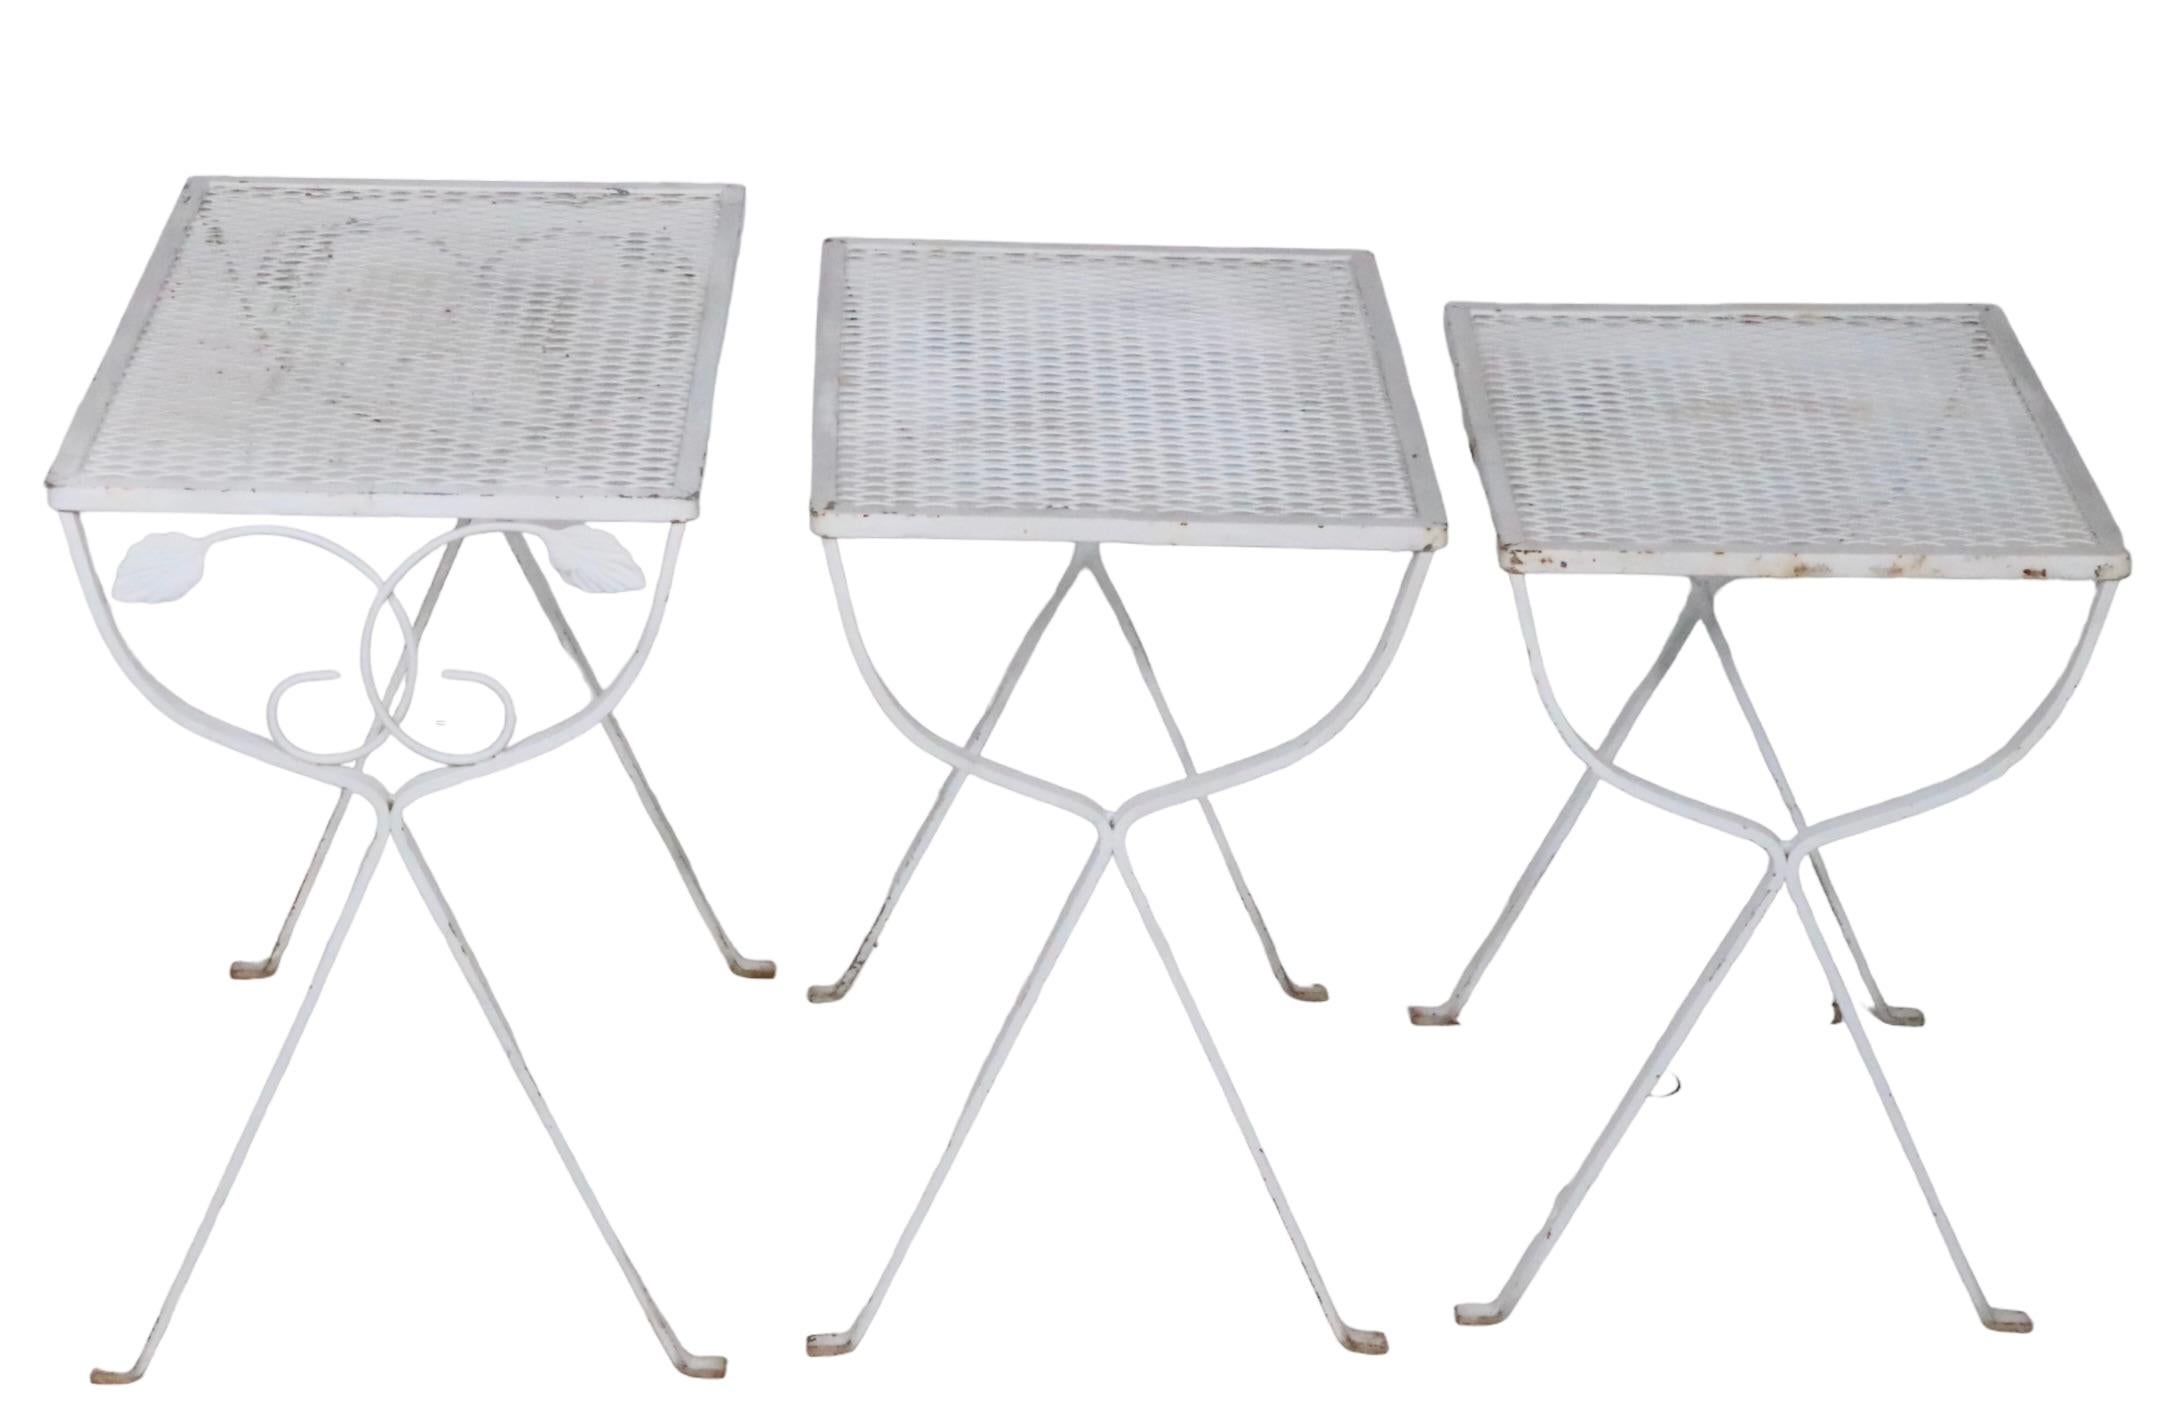 Set of three nesting tables, suitable for indoor outdoor, patio, garden, poolside tables, attributed to Woodard, circa 1950/1970's. The tables have wrought iron bases, with metal mesh tops, all are structurally sound and sturdy, all show some